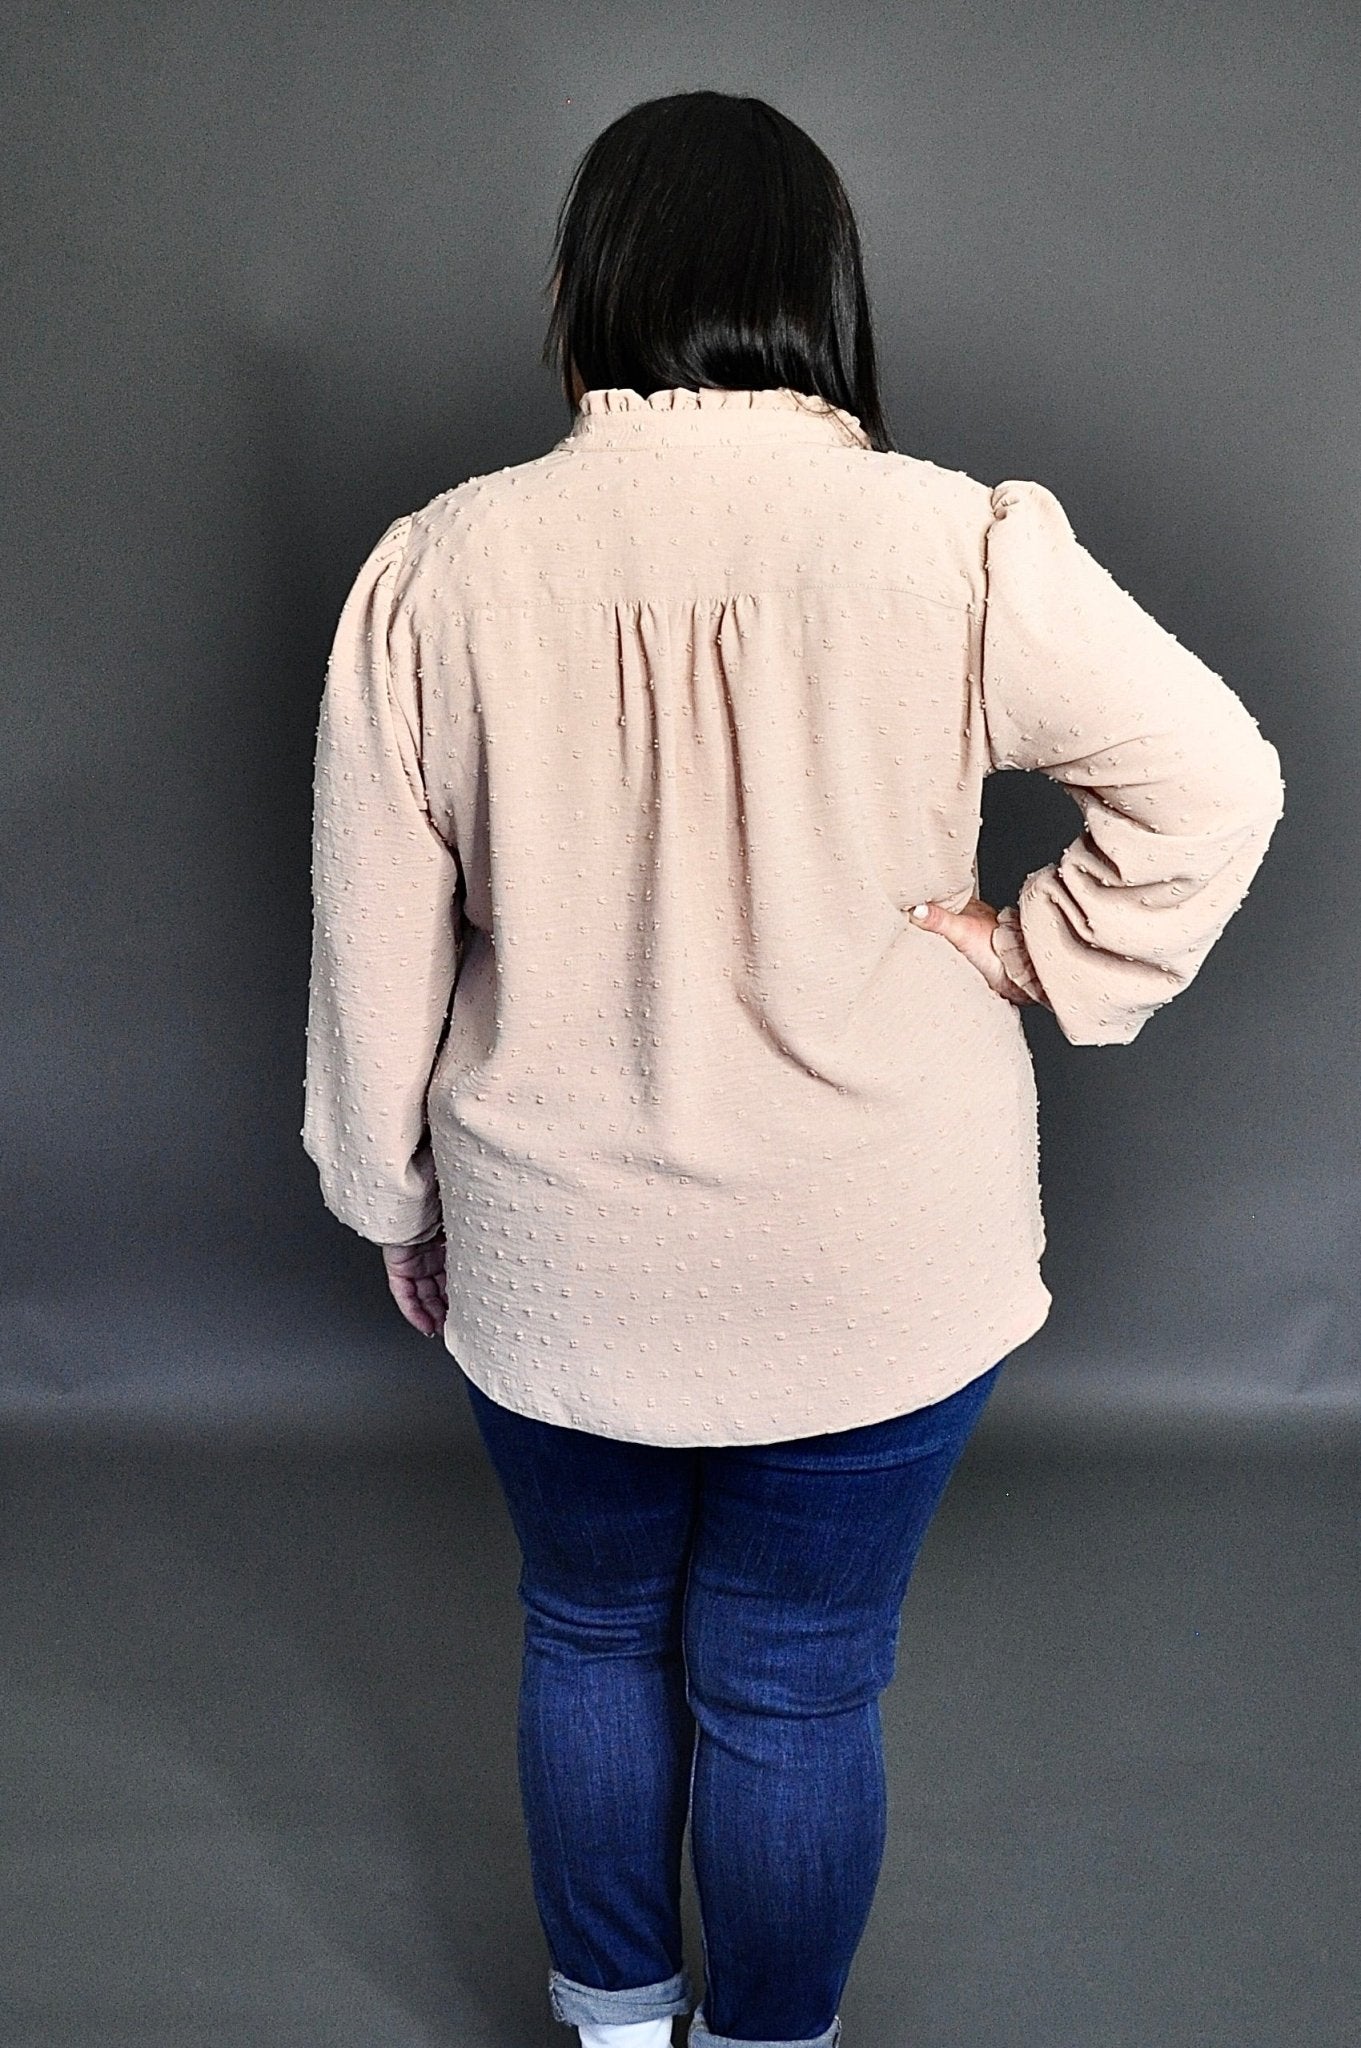 The Dot Blouse by Dotty, Nude, back view, v-neck, ruffles and tie at collar, long sleeves with smocking at the cuffs, gathers at the back, sizes XS to 1X, made in Toronto